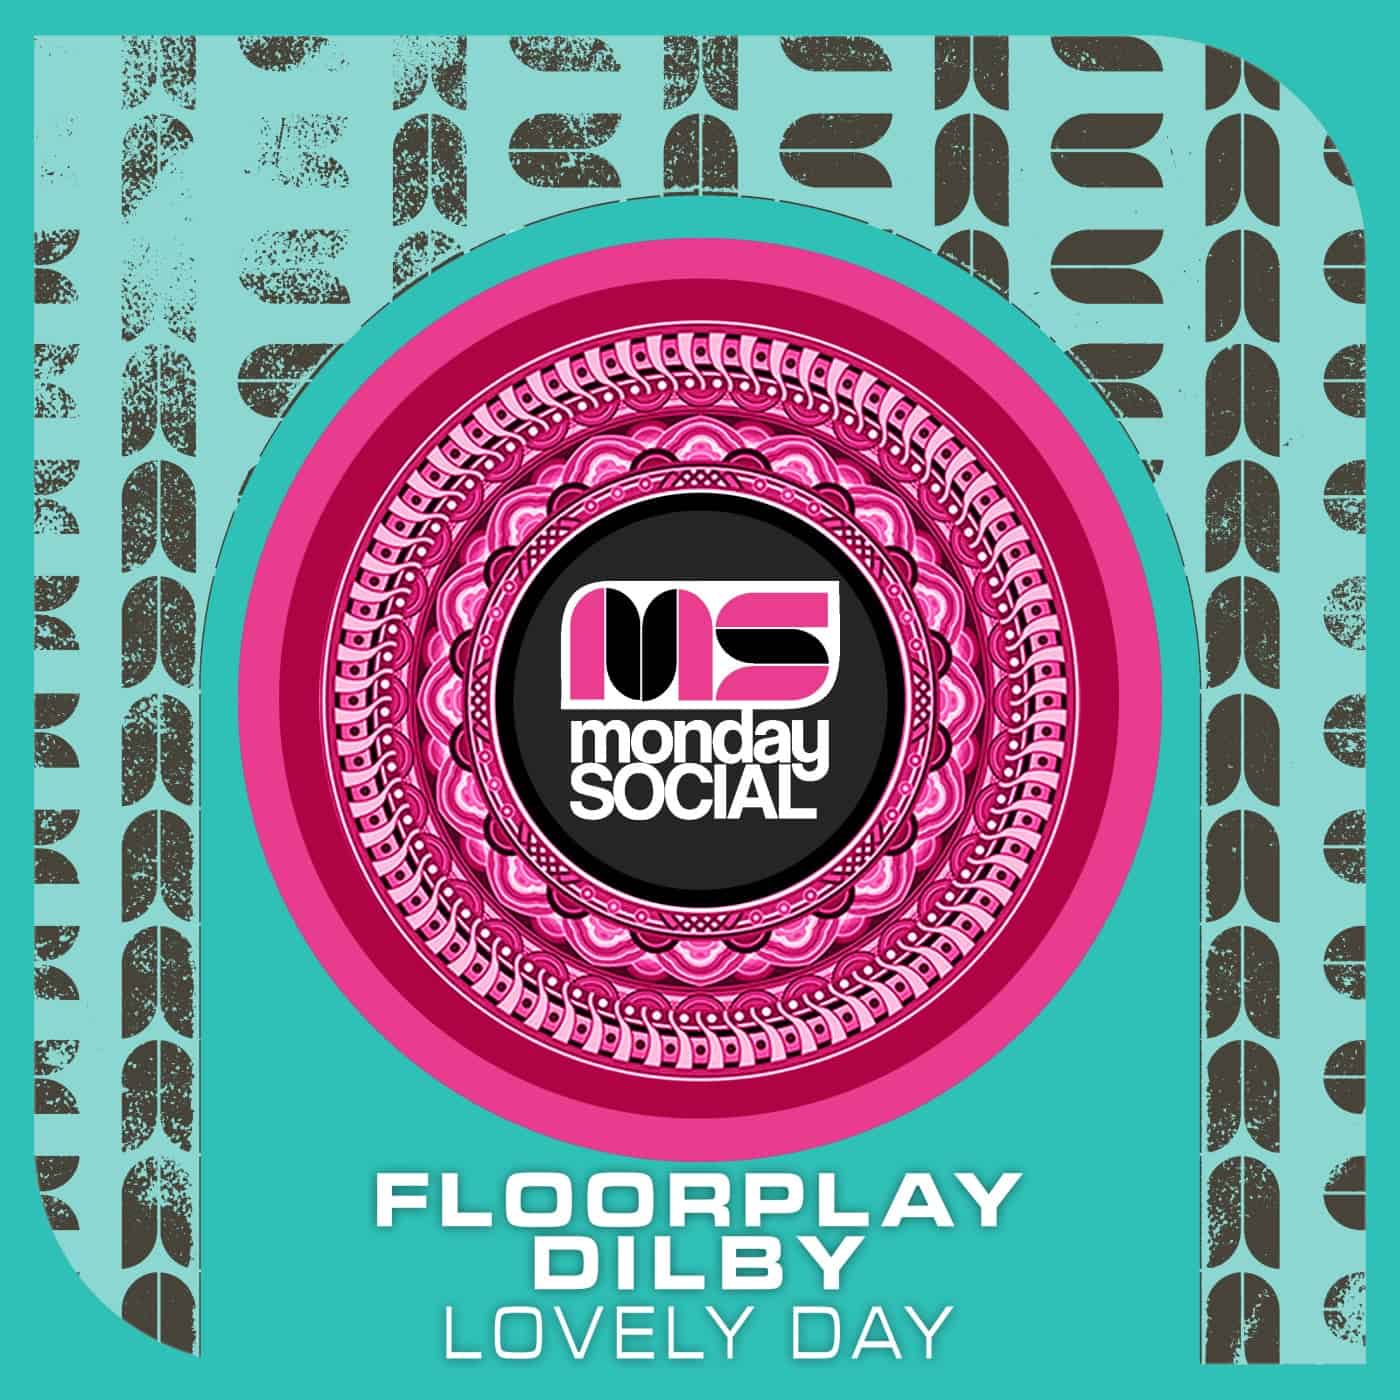 Download Dilby, Freddy Be, Floorplay (LA) - Lovely Day on Electrobuzz